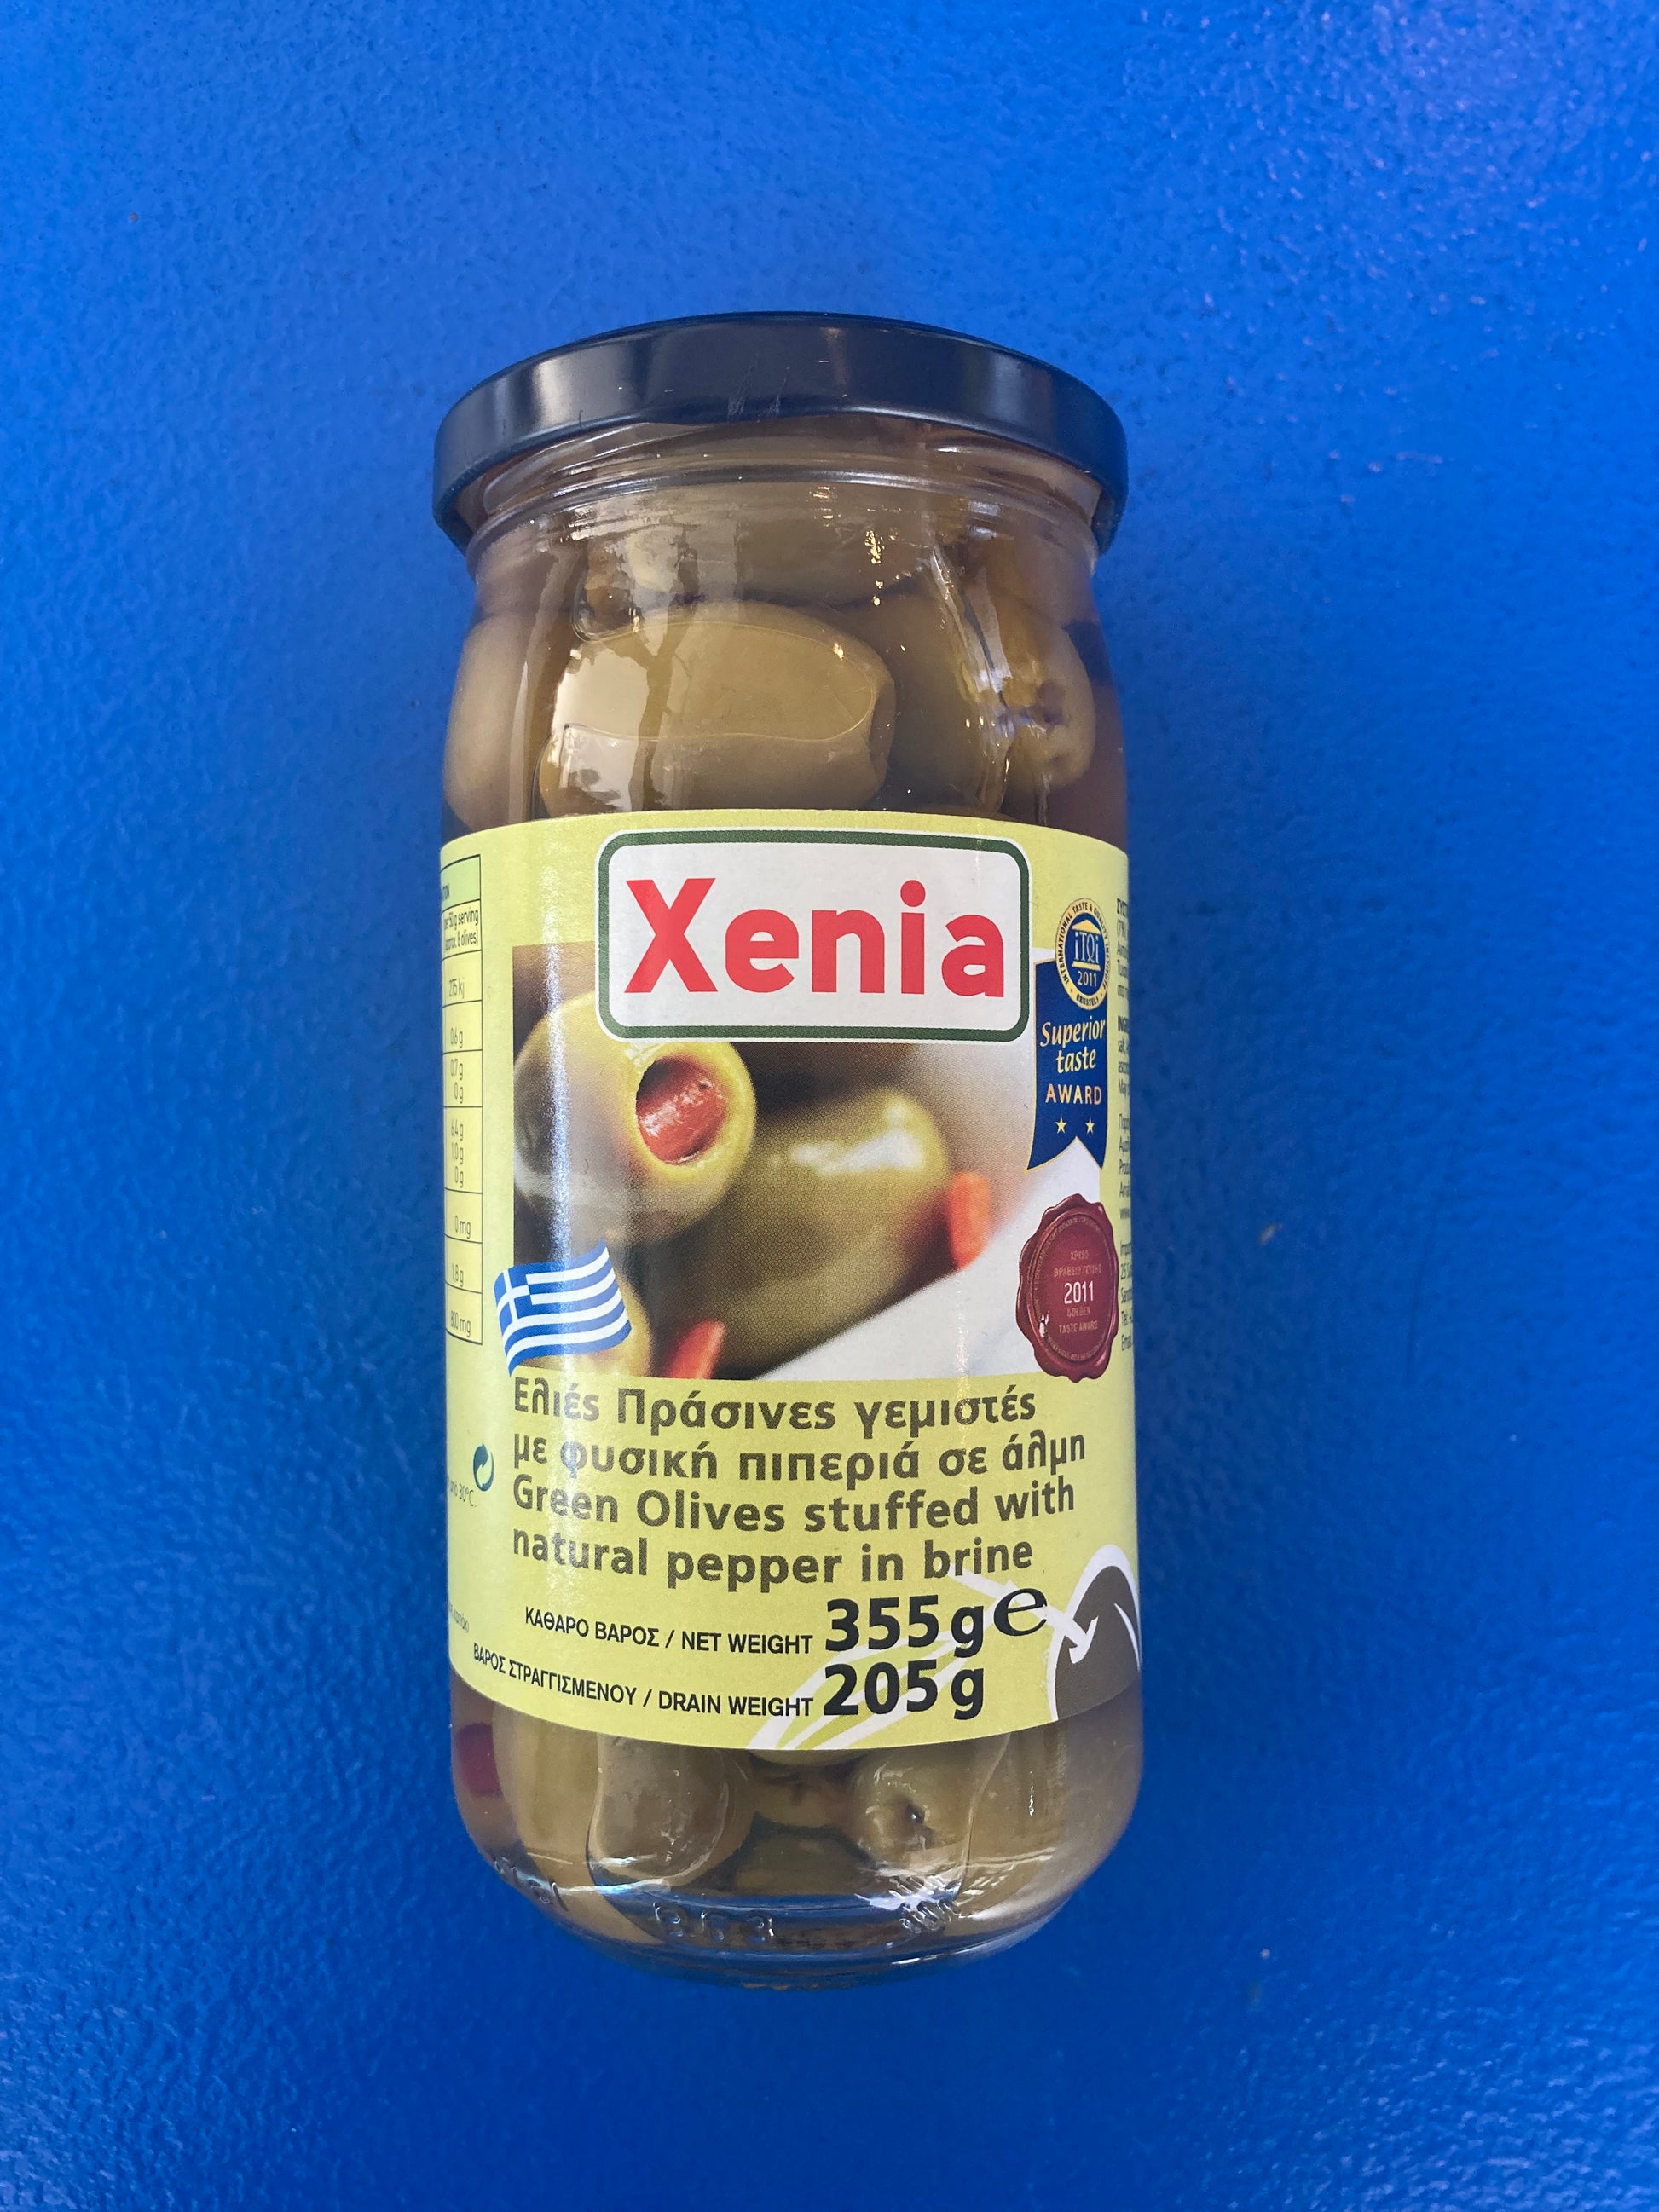 Xenia green olives stuffed with natural pepper in brine